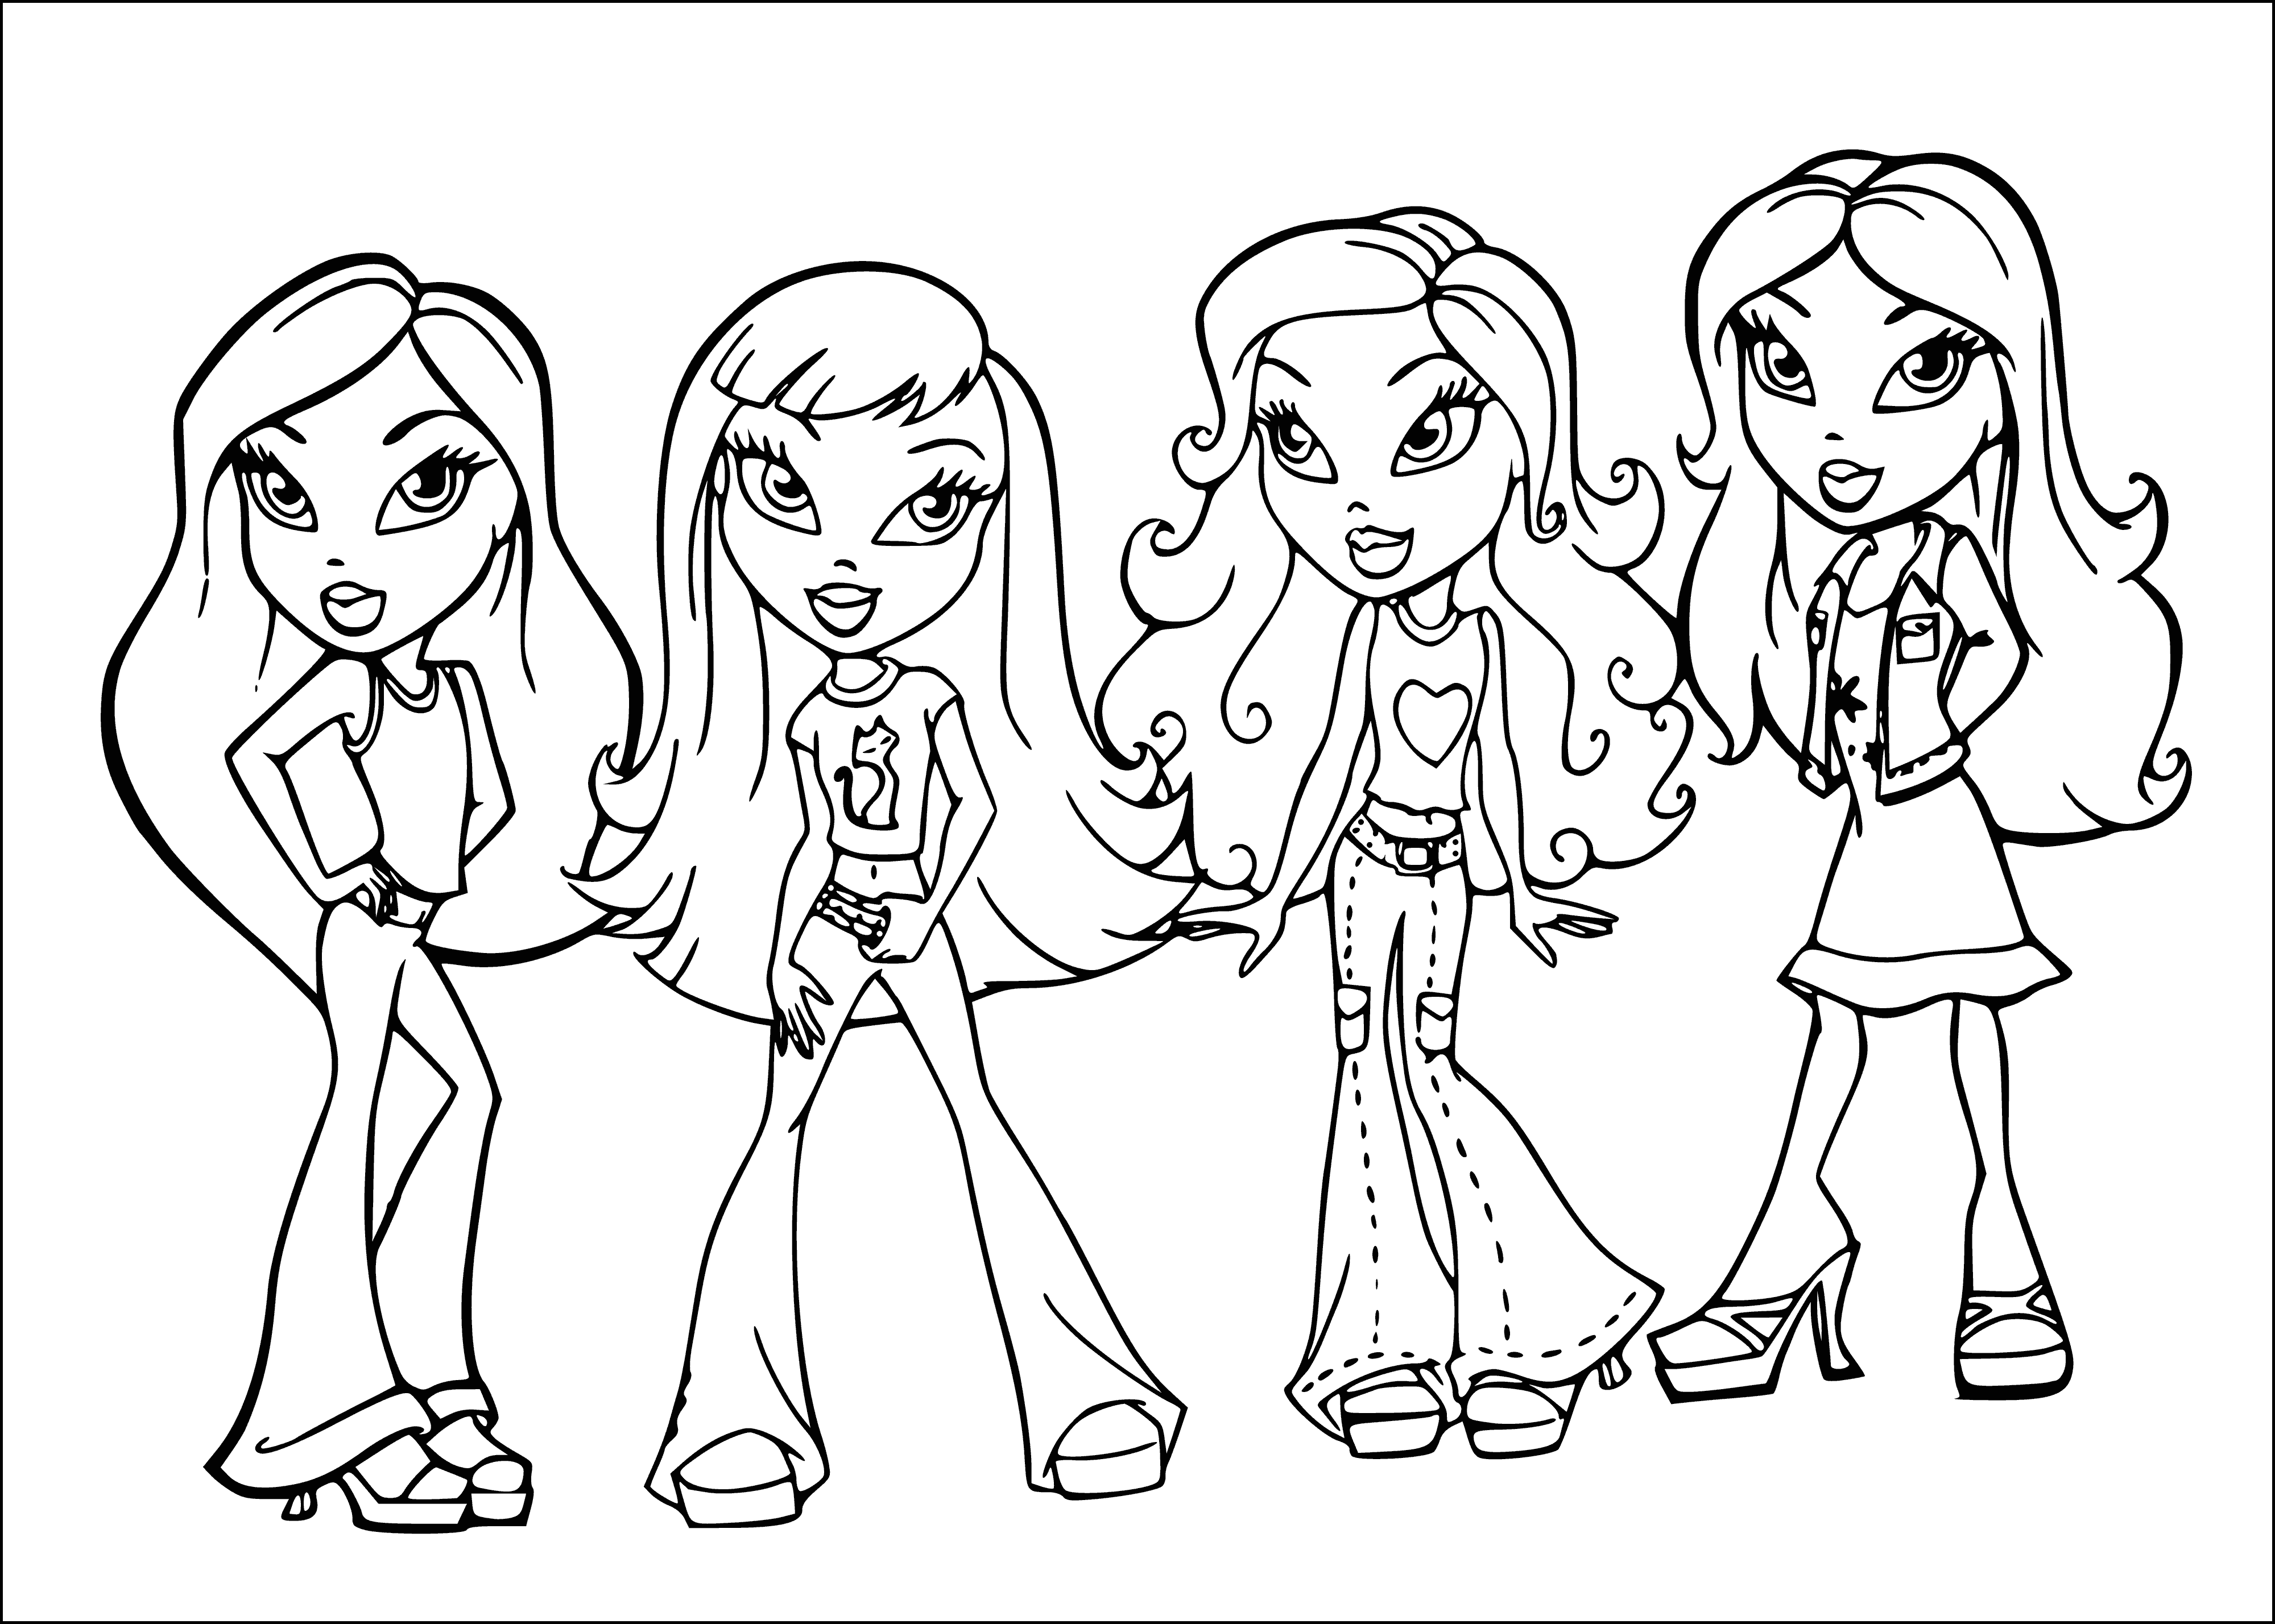 coloring page: Four fashion dolls, two blondes, two brunettes, each with unique style and trendy clothes. #BratzDolls